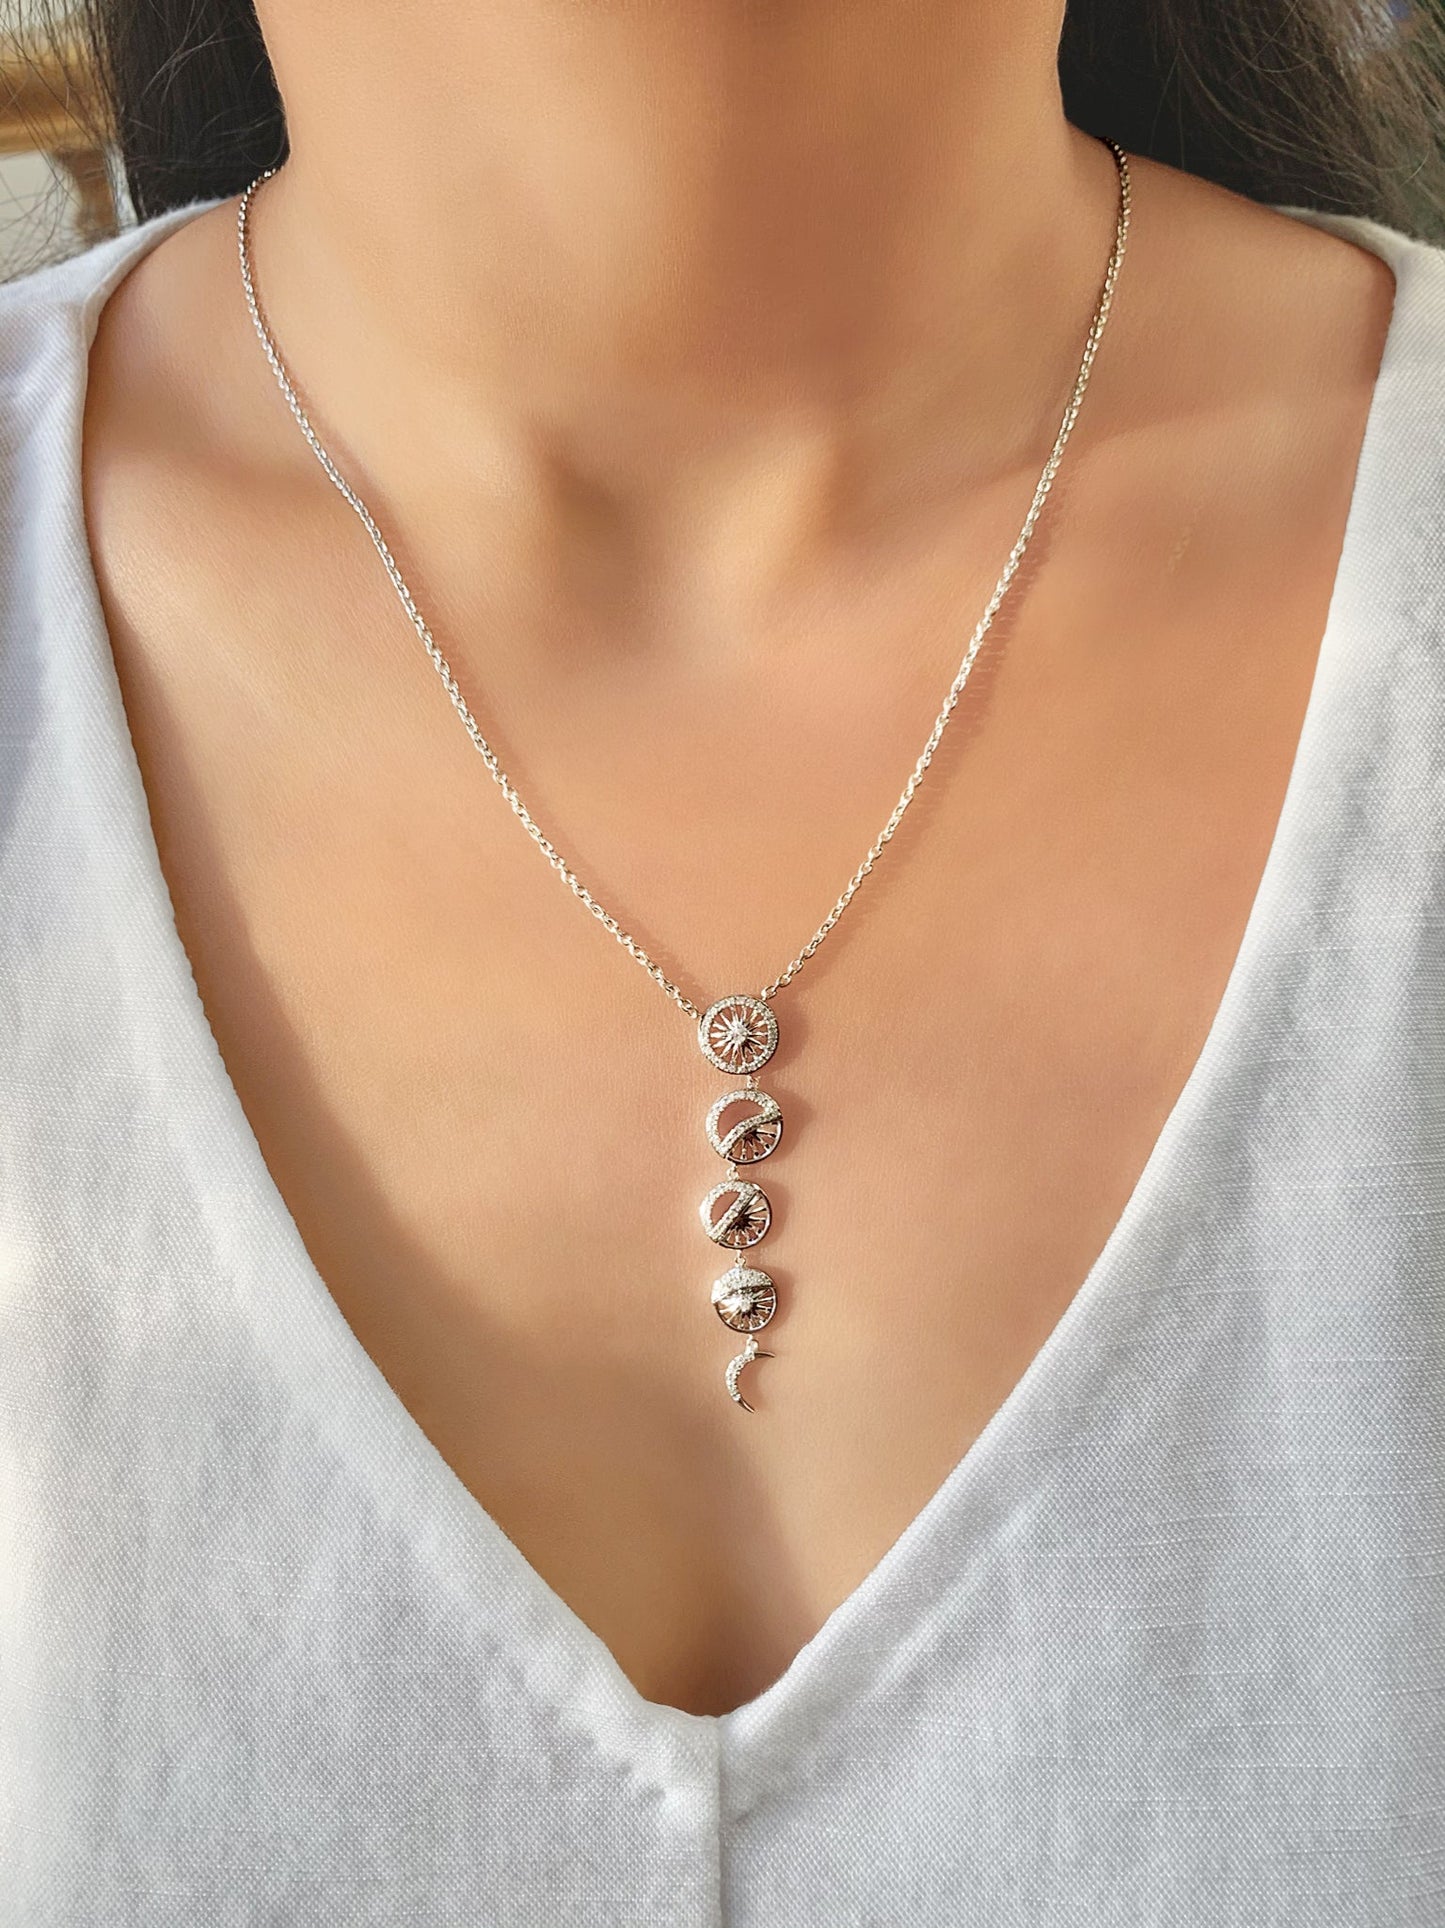 Moon Phases Diamond Necklace in Sterling Silver by LuvMyJewelry